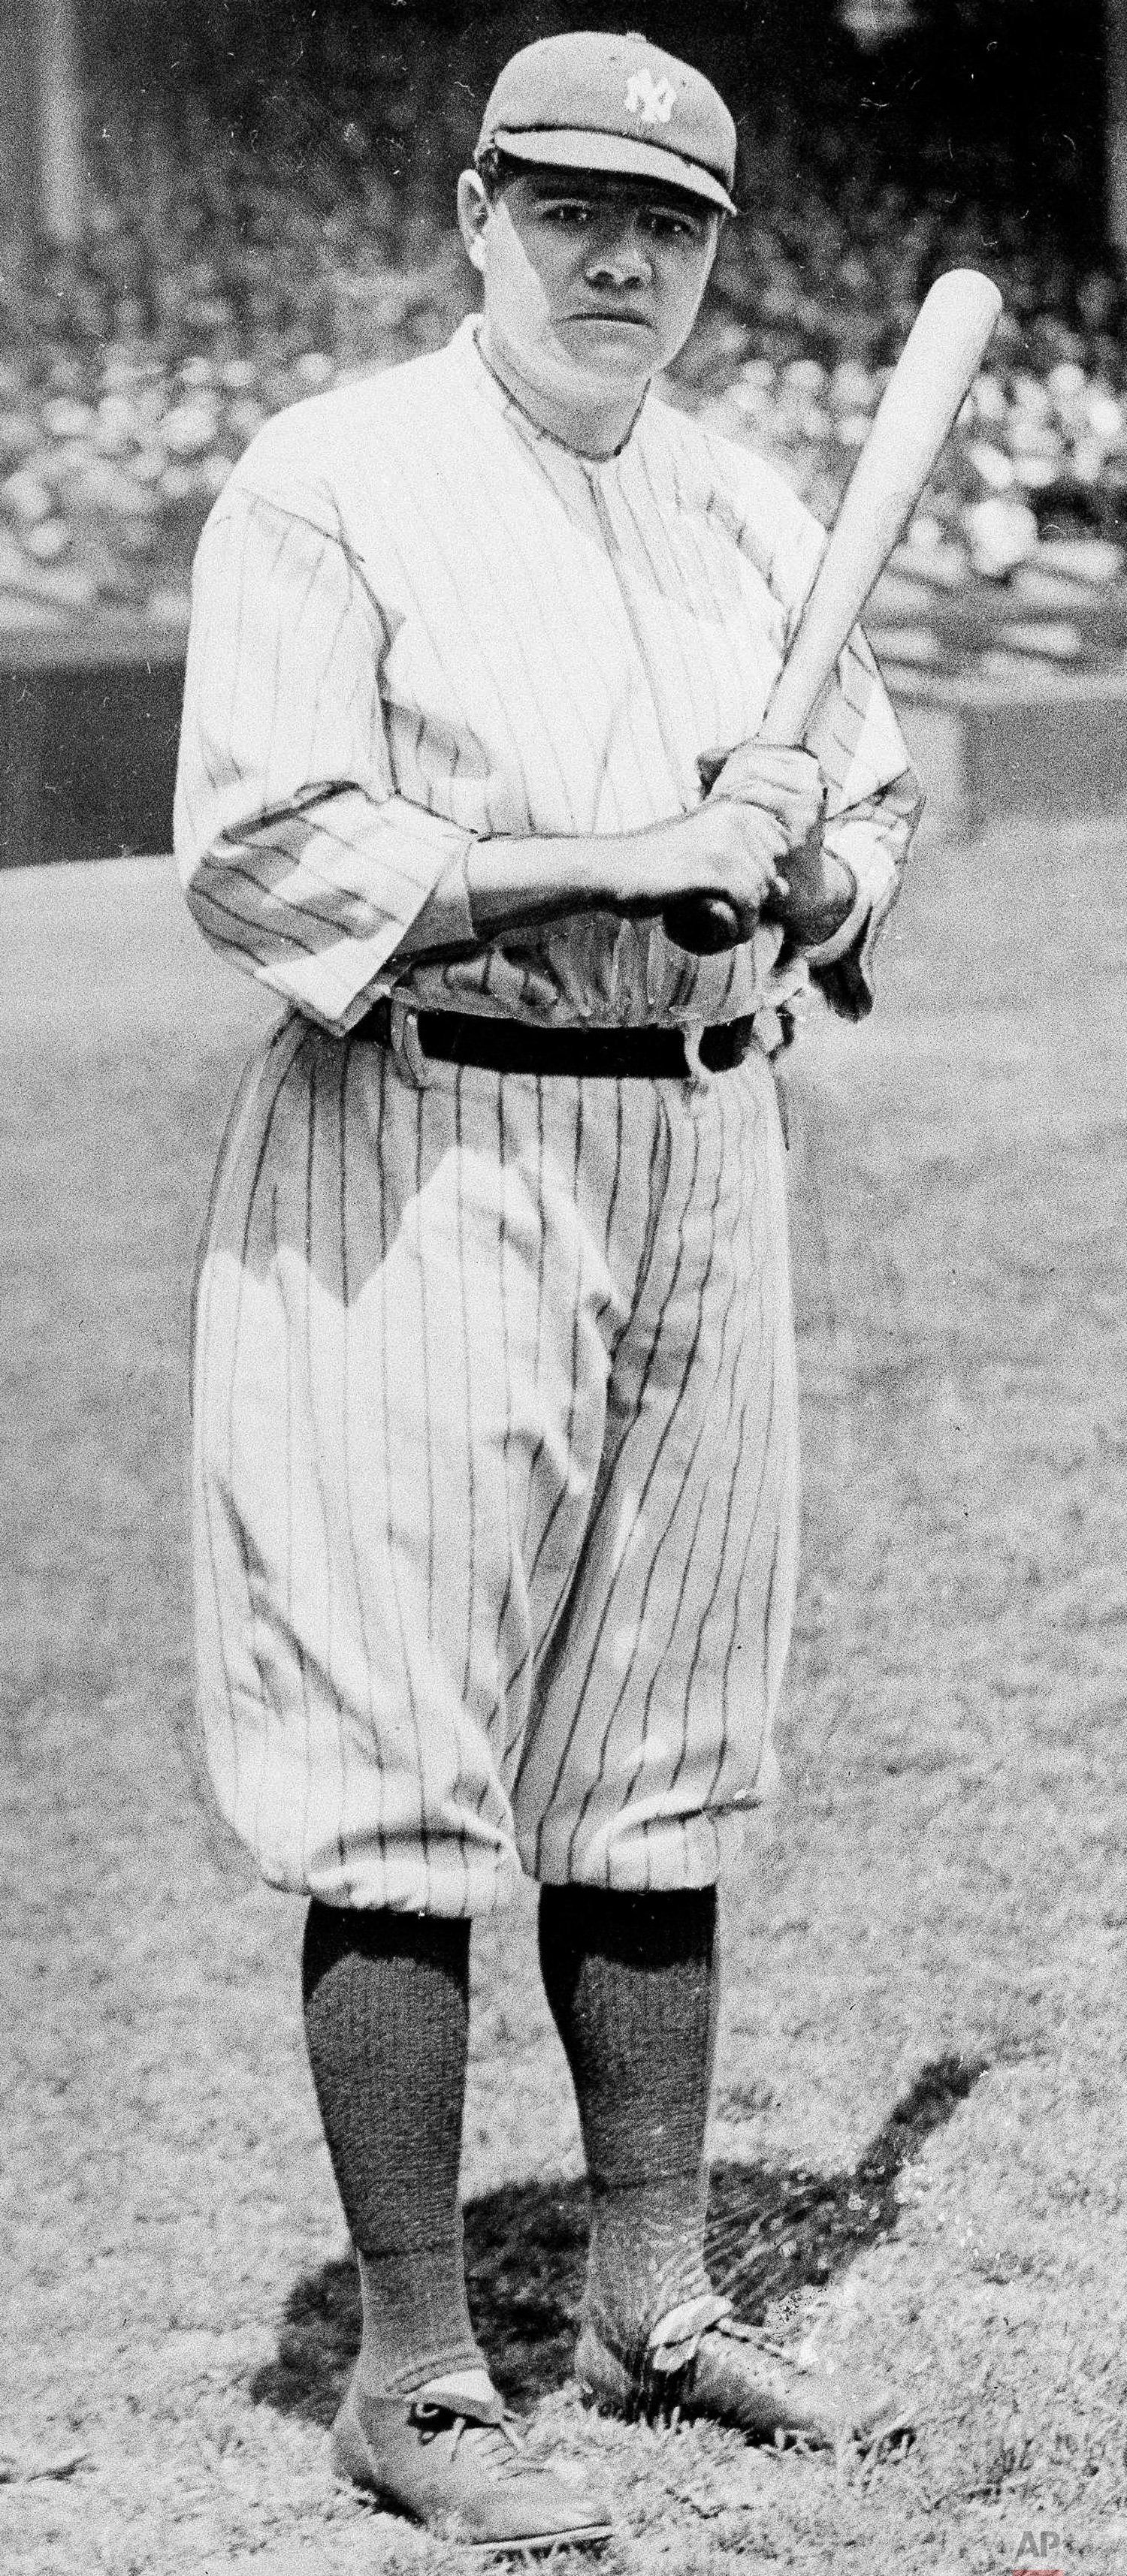  George Herman "Babe" Ruth as he appeared in 1922 with the New York Yankees. Location unknown.   (AP Photo) 